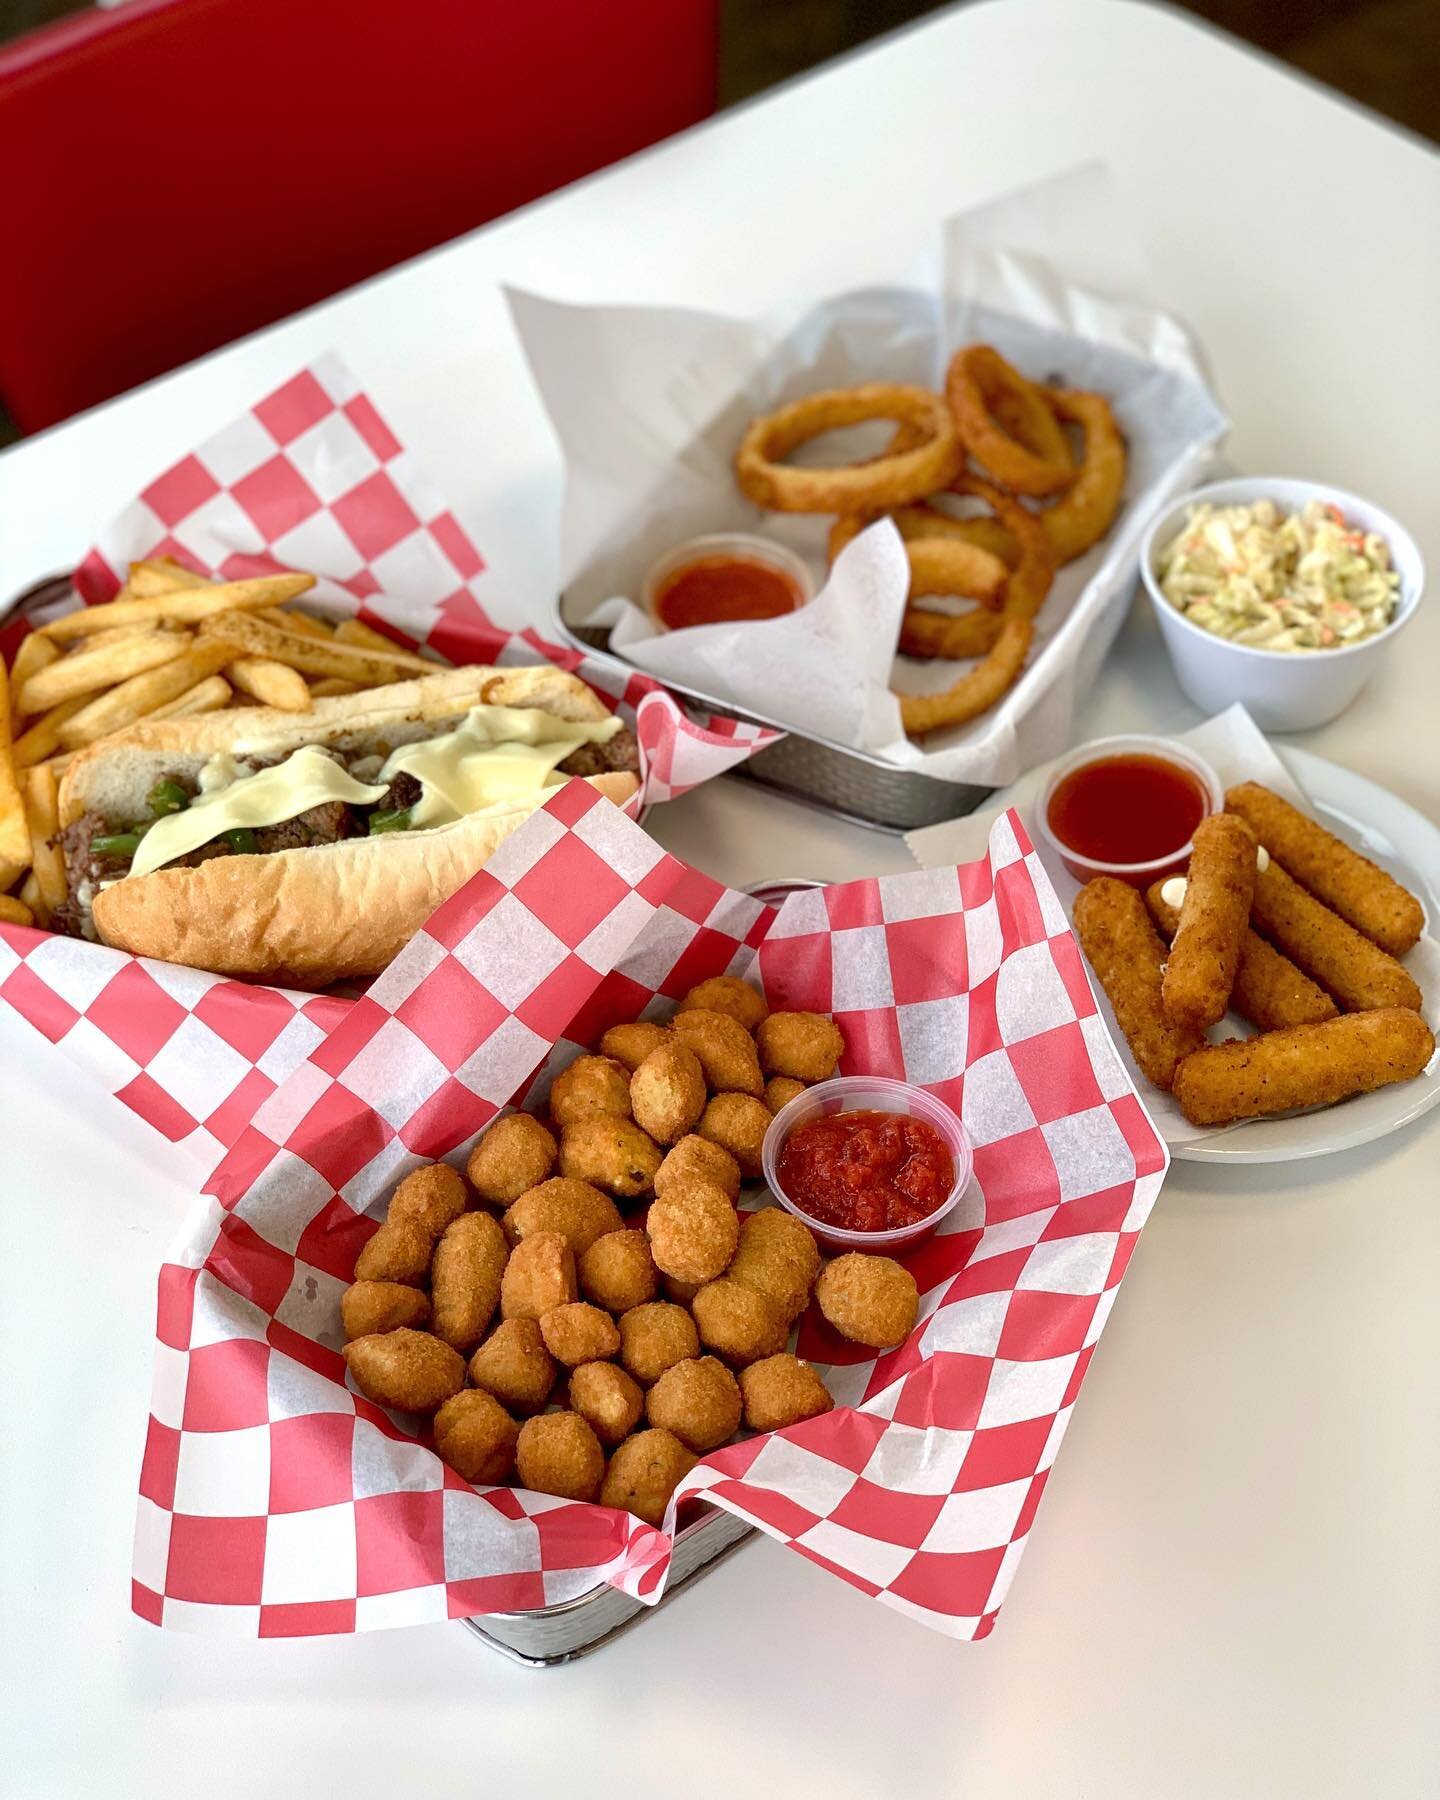 Gang&rsquo;s all here 😩 a beautiful round up of fried okra, a Philly cheesesteak, fries, onions rings, coleslaw and mozzarella sticks all from @flynnseats 😋 You can count me in on this one! I for sure want to me kicking it with this group 🙋&zwj;♀️